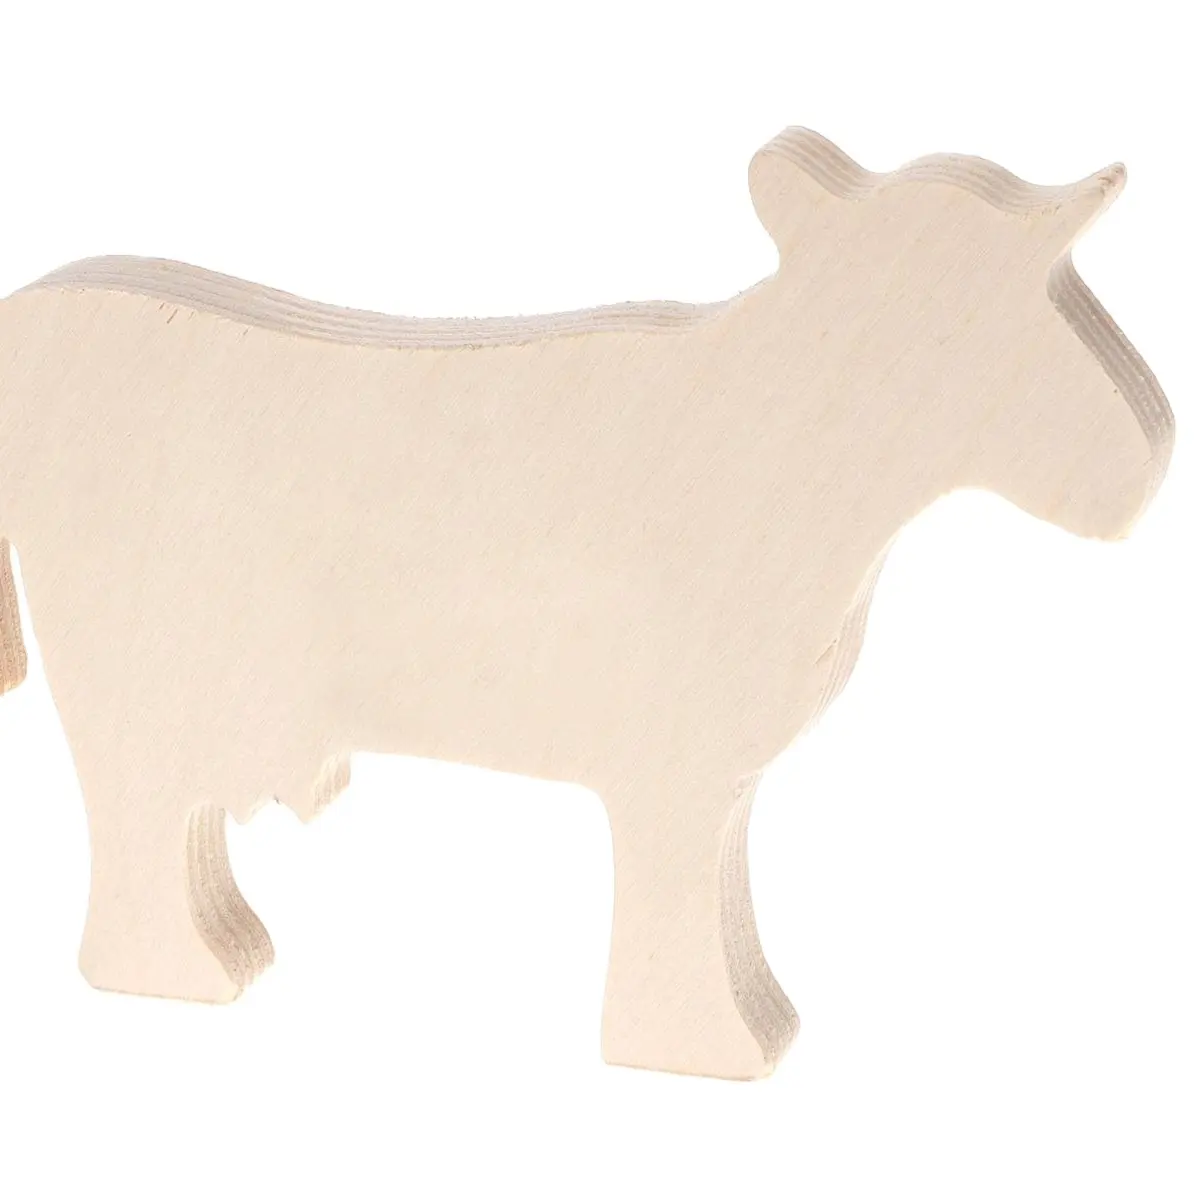 LGW Wood Shape Cow 5.38 x 4.13 x 0.5" durable lightweight natural raw unfinished environmentally friendly decorate to suit paint